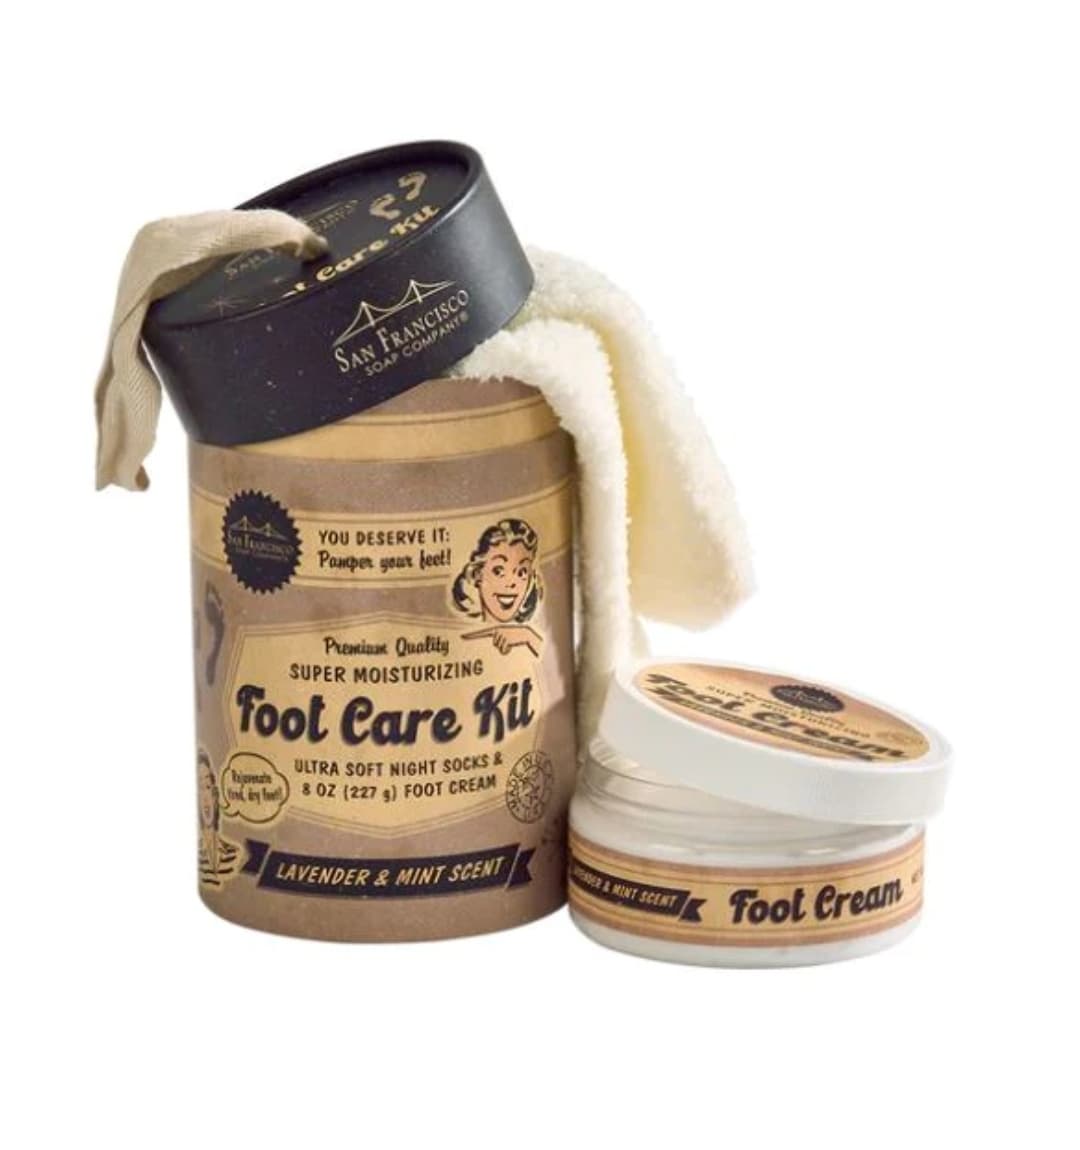 SF SOAP COMPANY FOOT CARE KIT LAVENDER AND MINT